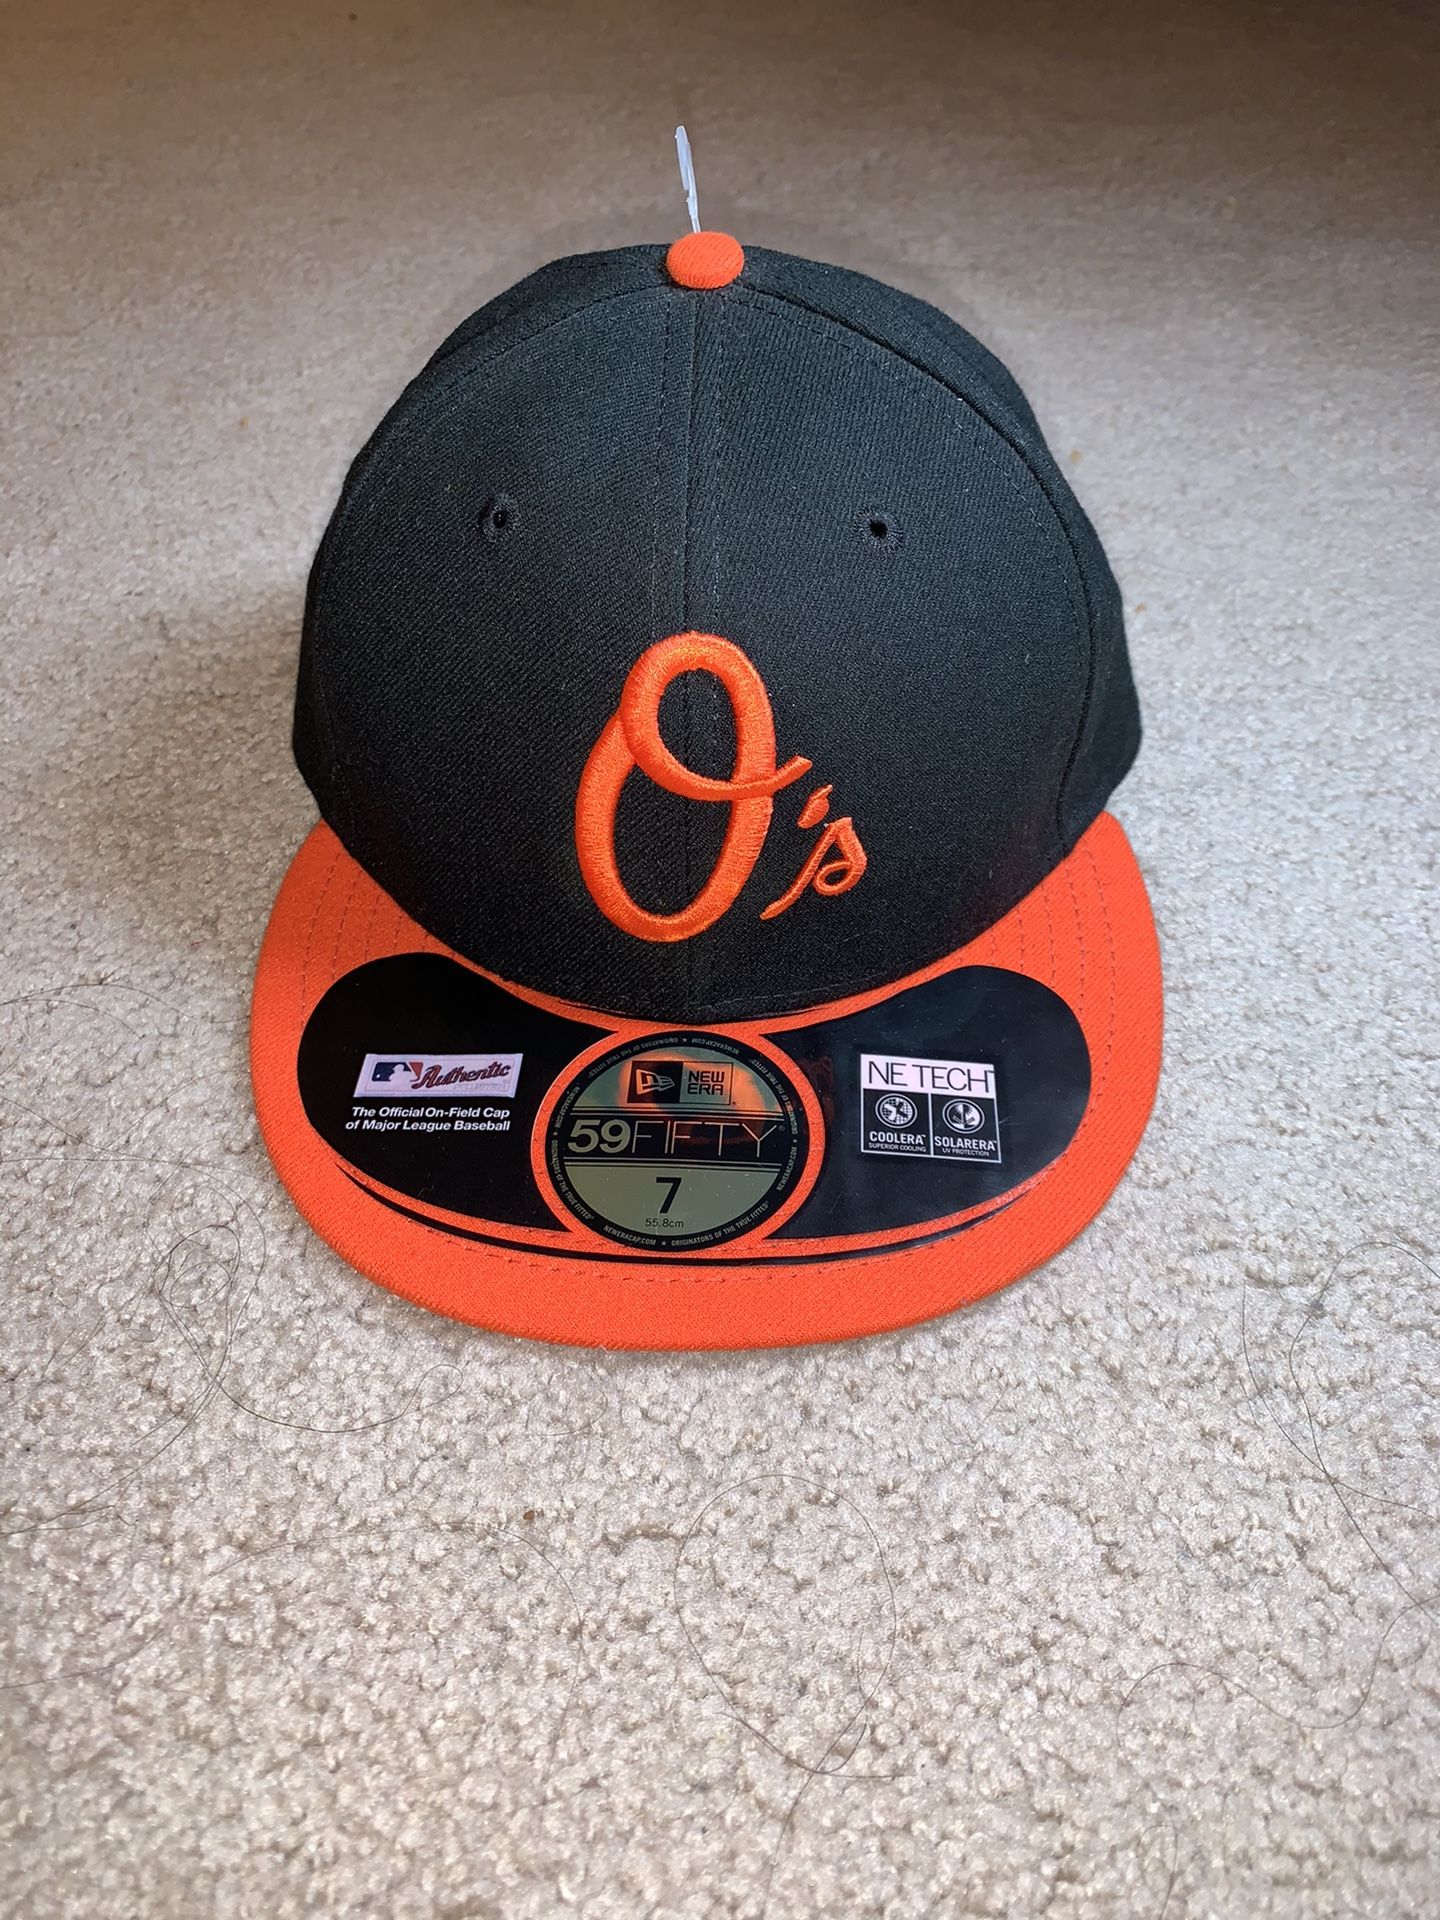 Baltimore Orioles New Era 59FIFTY Fitted Hat - Size 7 (55.8cm) - NWT